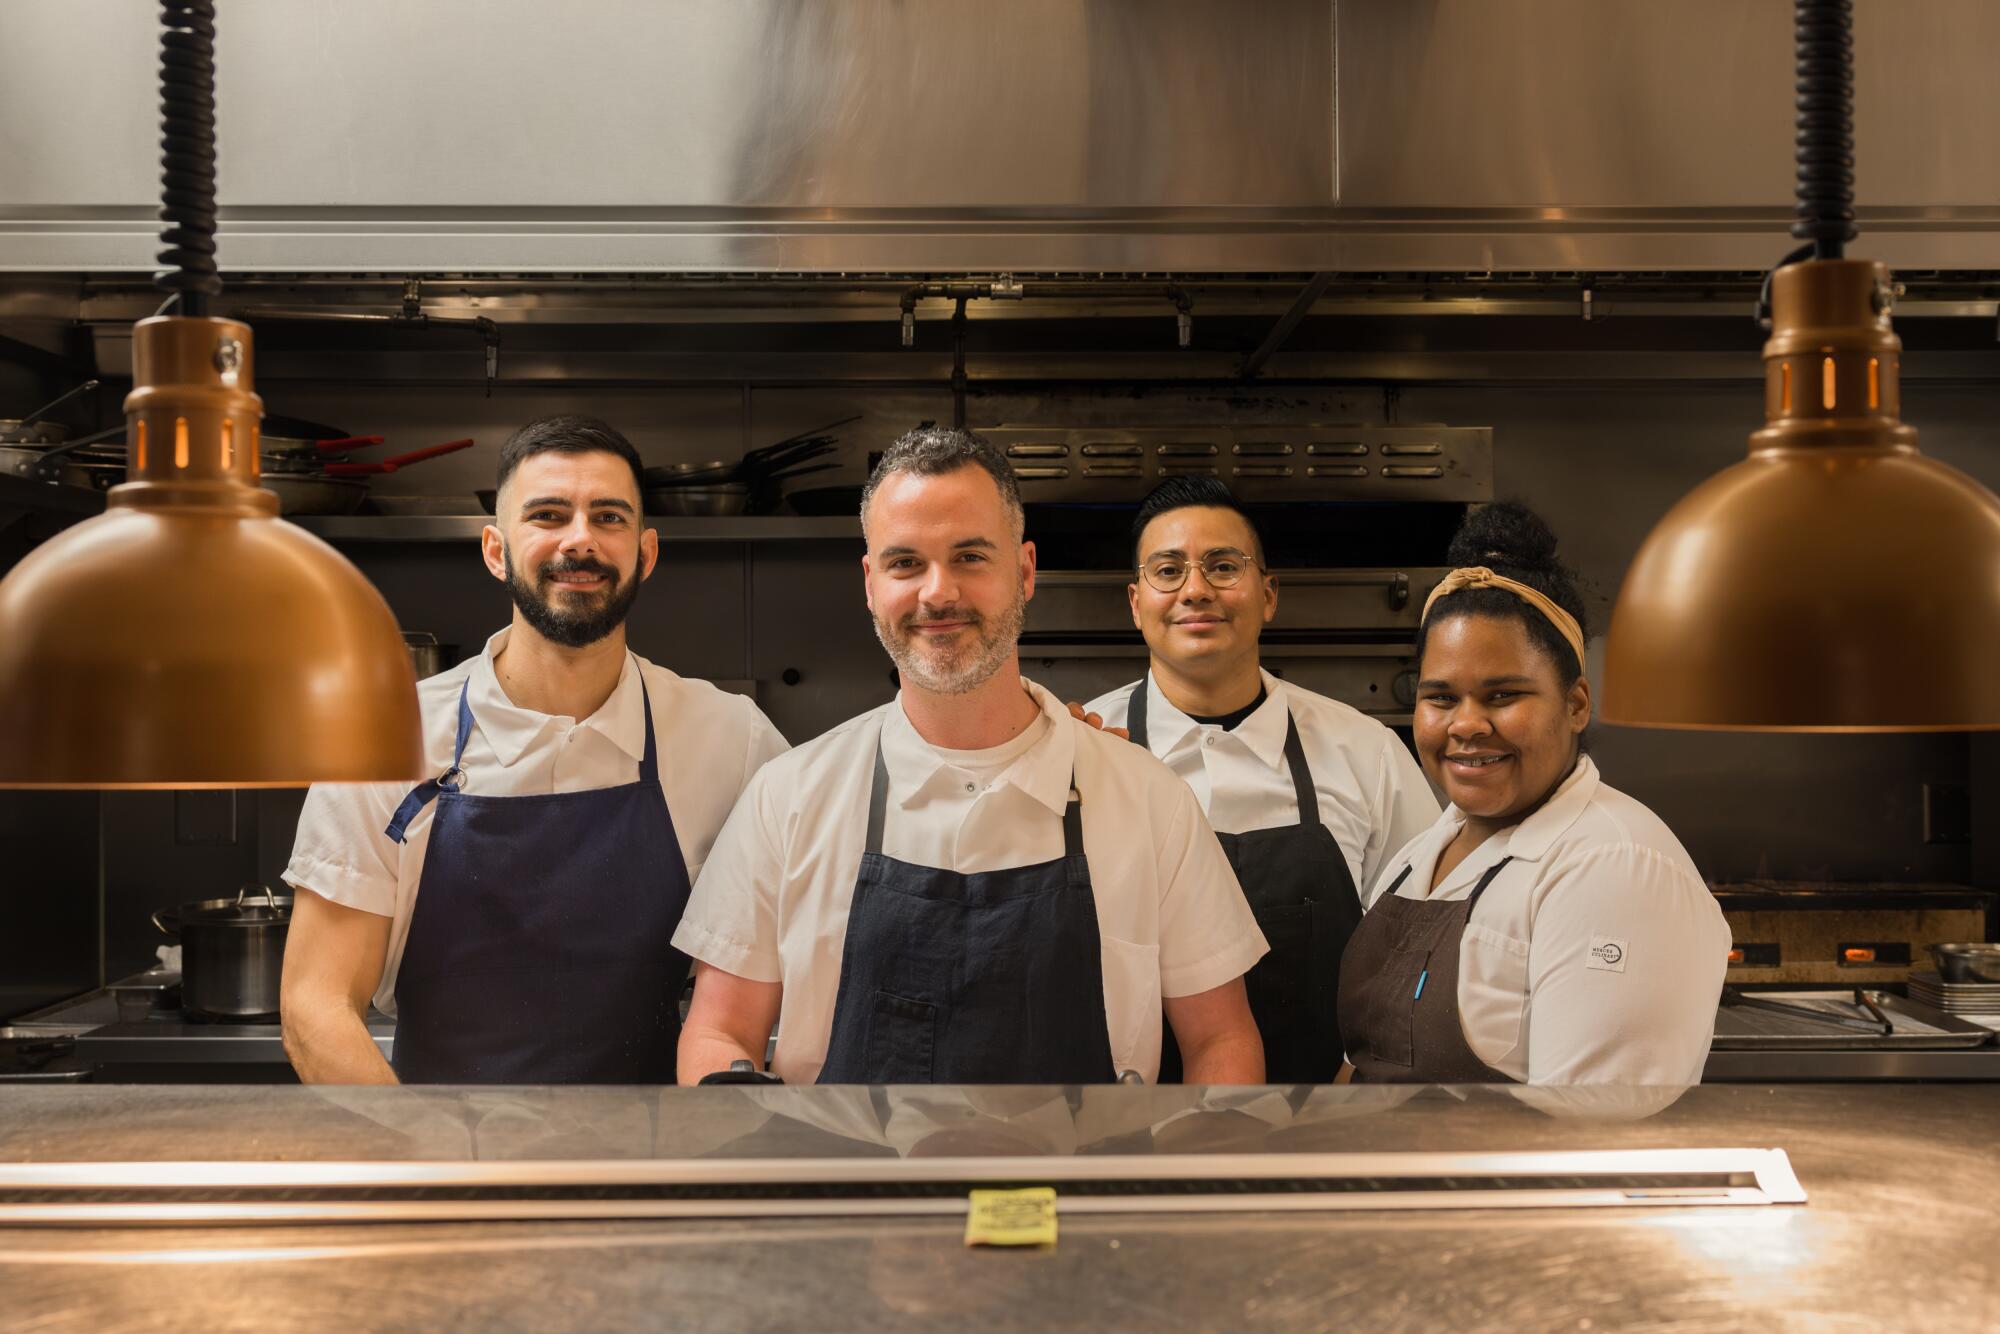 Bar Chelou's chefs smile for a photo in the kitchen.